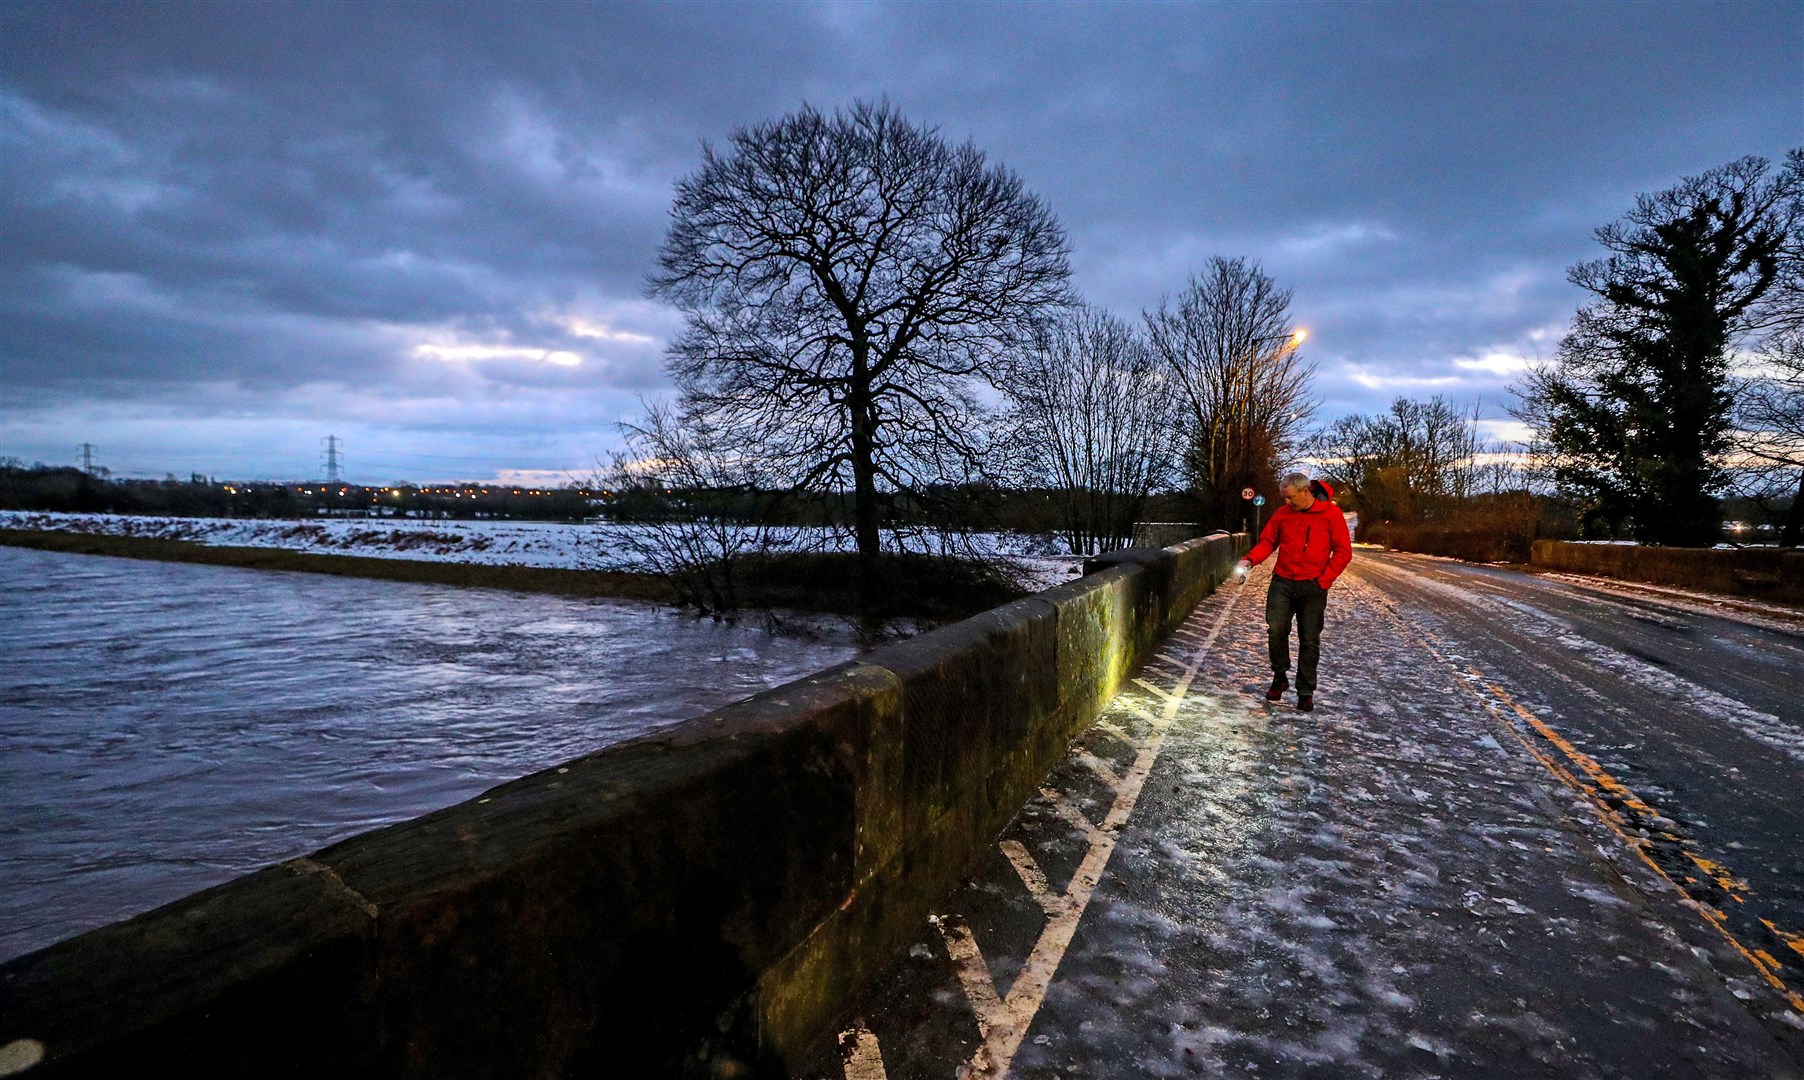 A council worker in Didsbury checks a bridge over the River Mersey for damage after heavy rain (Peter Byrne/PA)